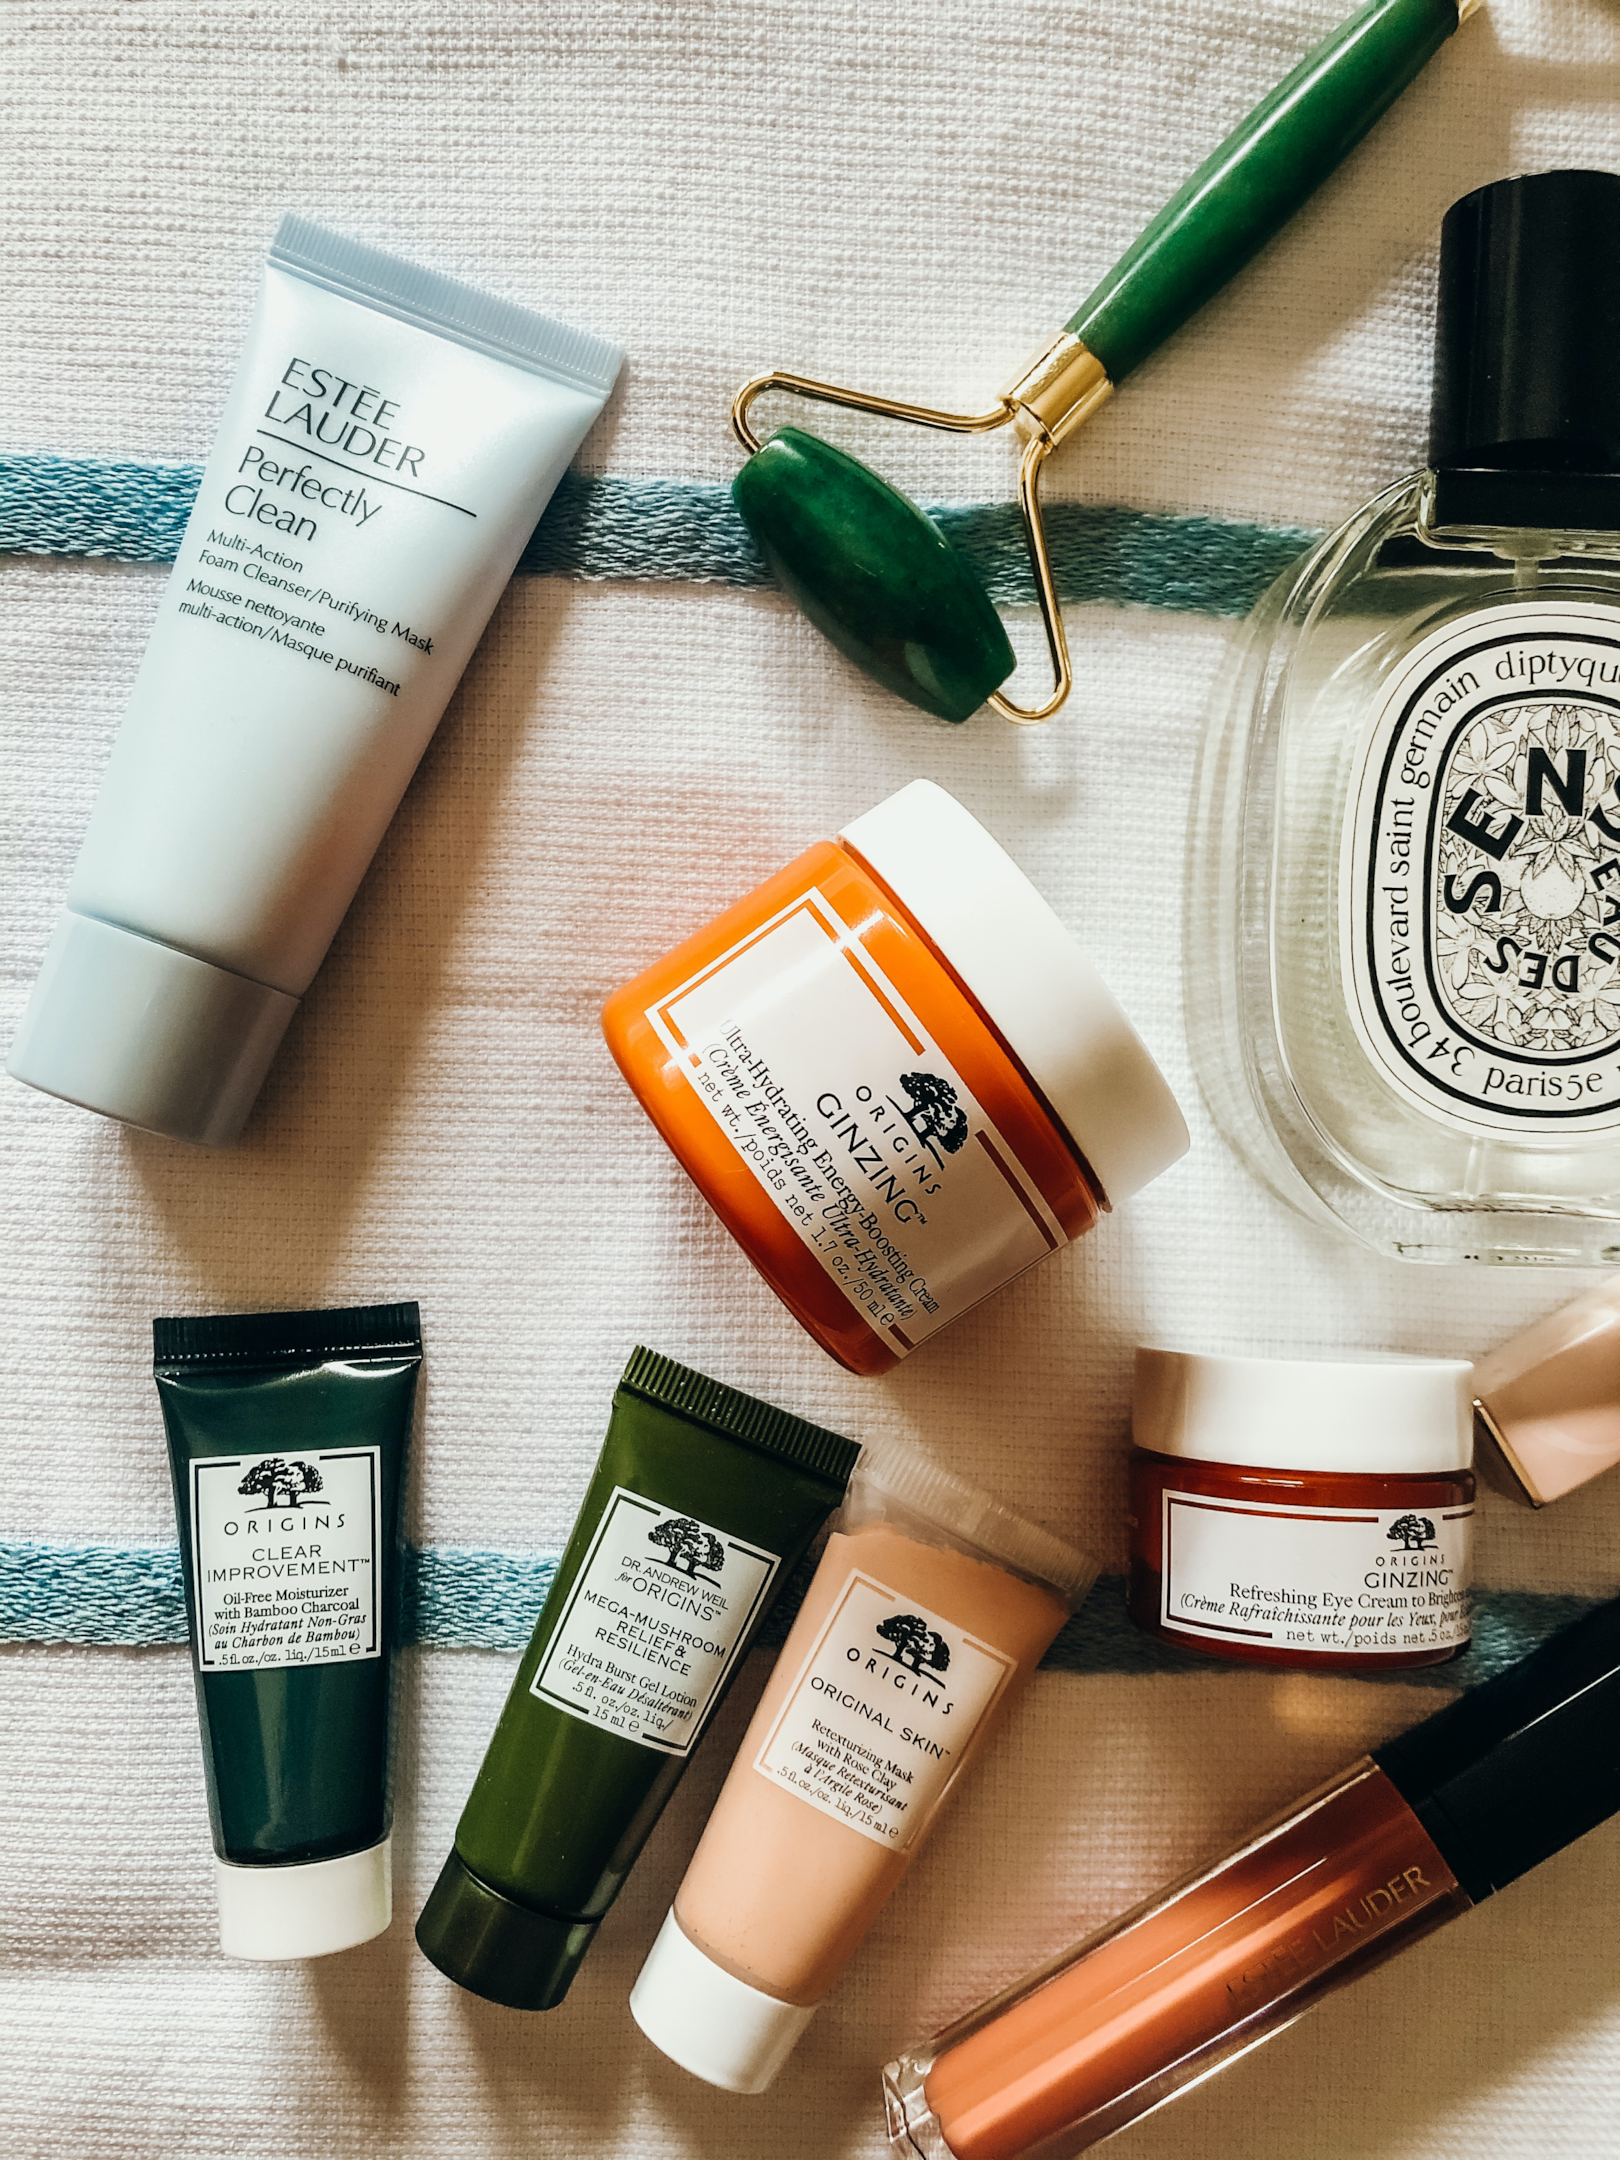 A skincare brand shows off their new line in stores now.